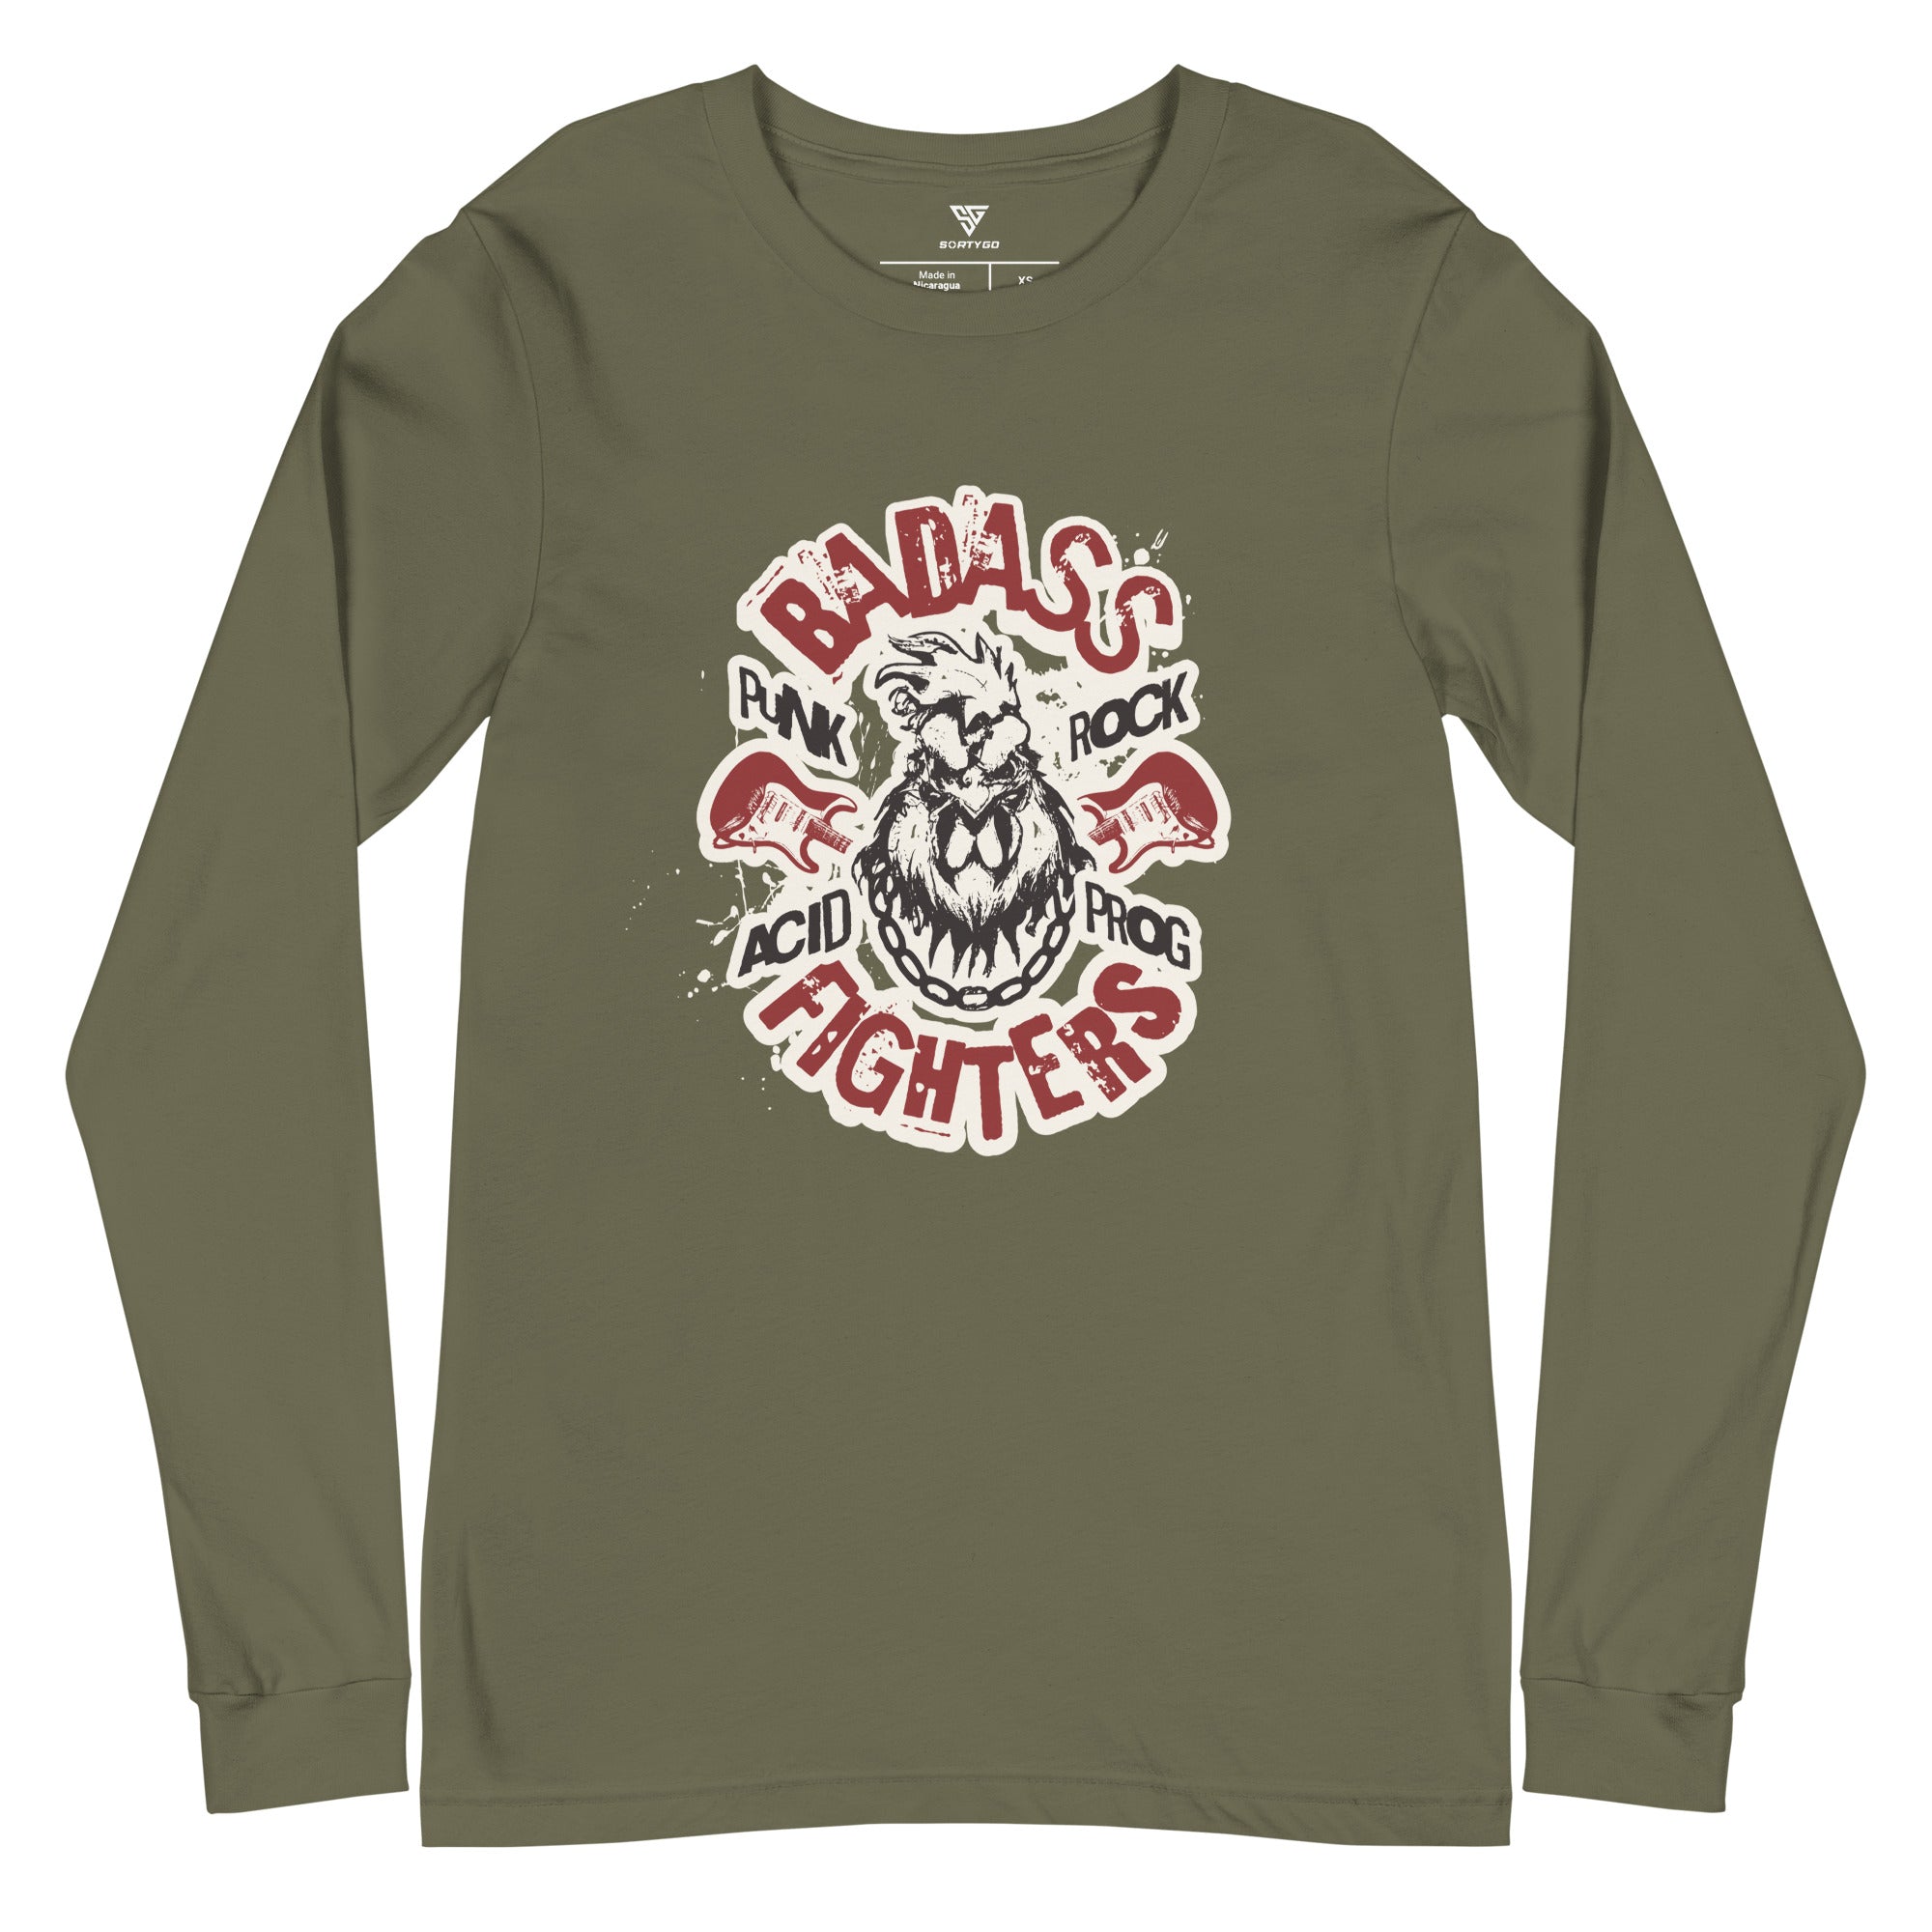 SORTYGO - Badass Fighters Men Long Sleeve T-Shirt in Military Green